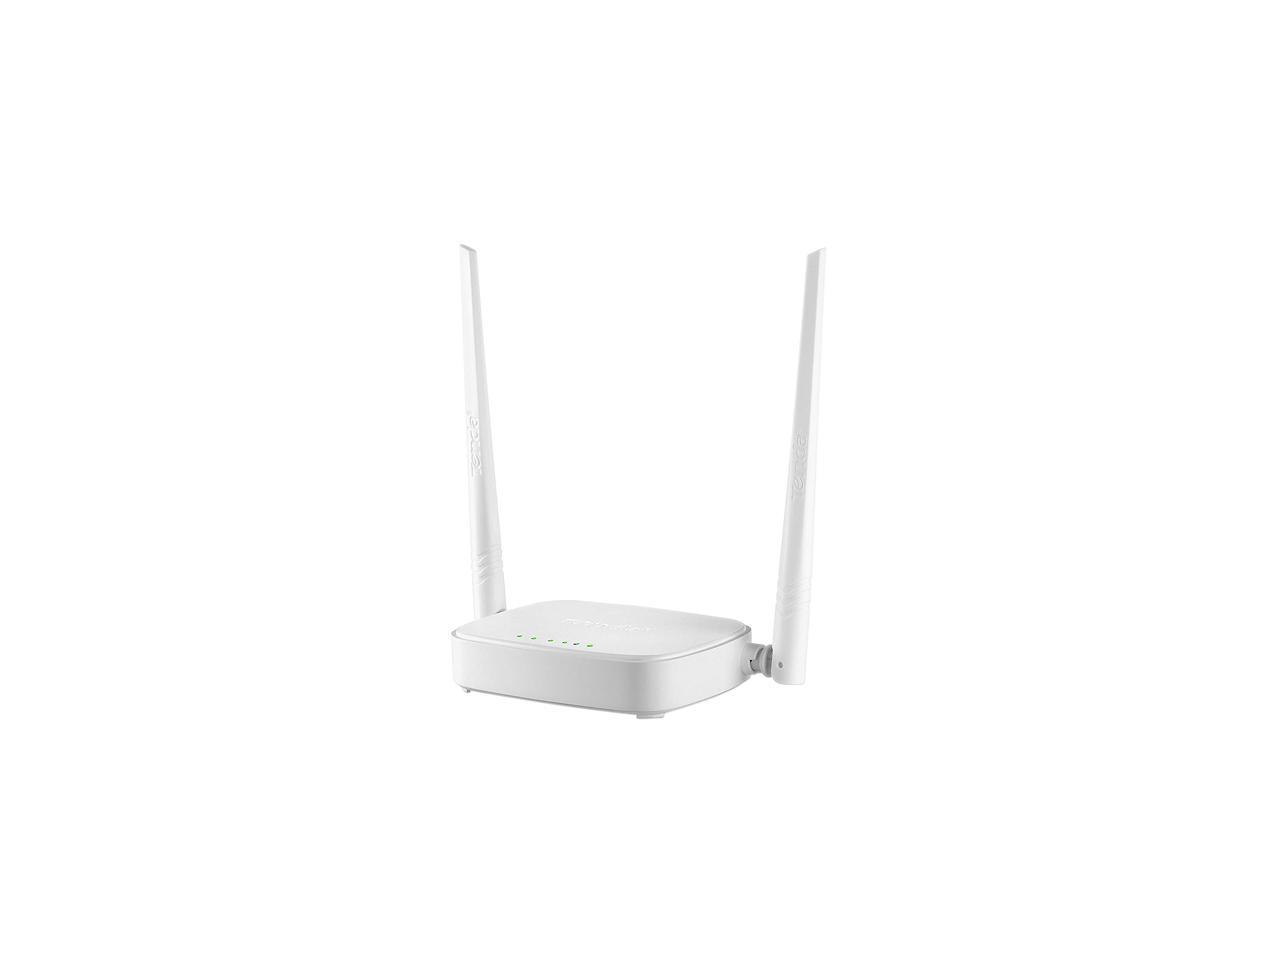 Original Tenda N301 Wireless-N300 Easy Setup Router with Free Shipping 